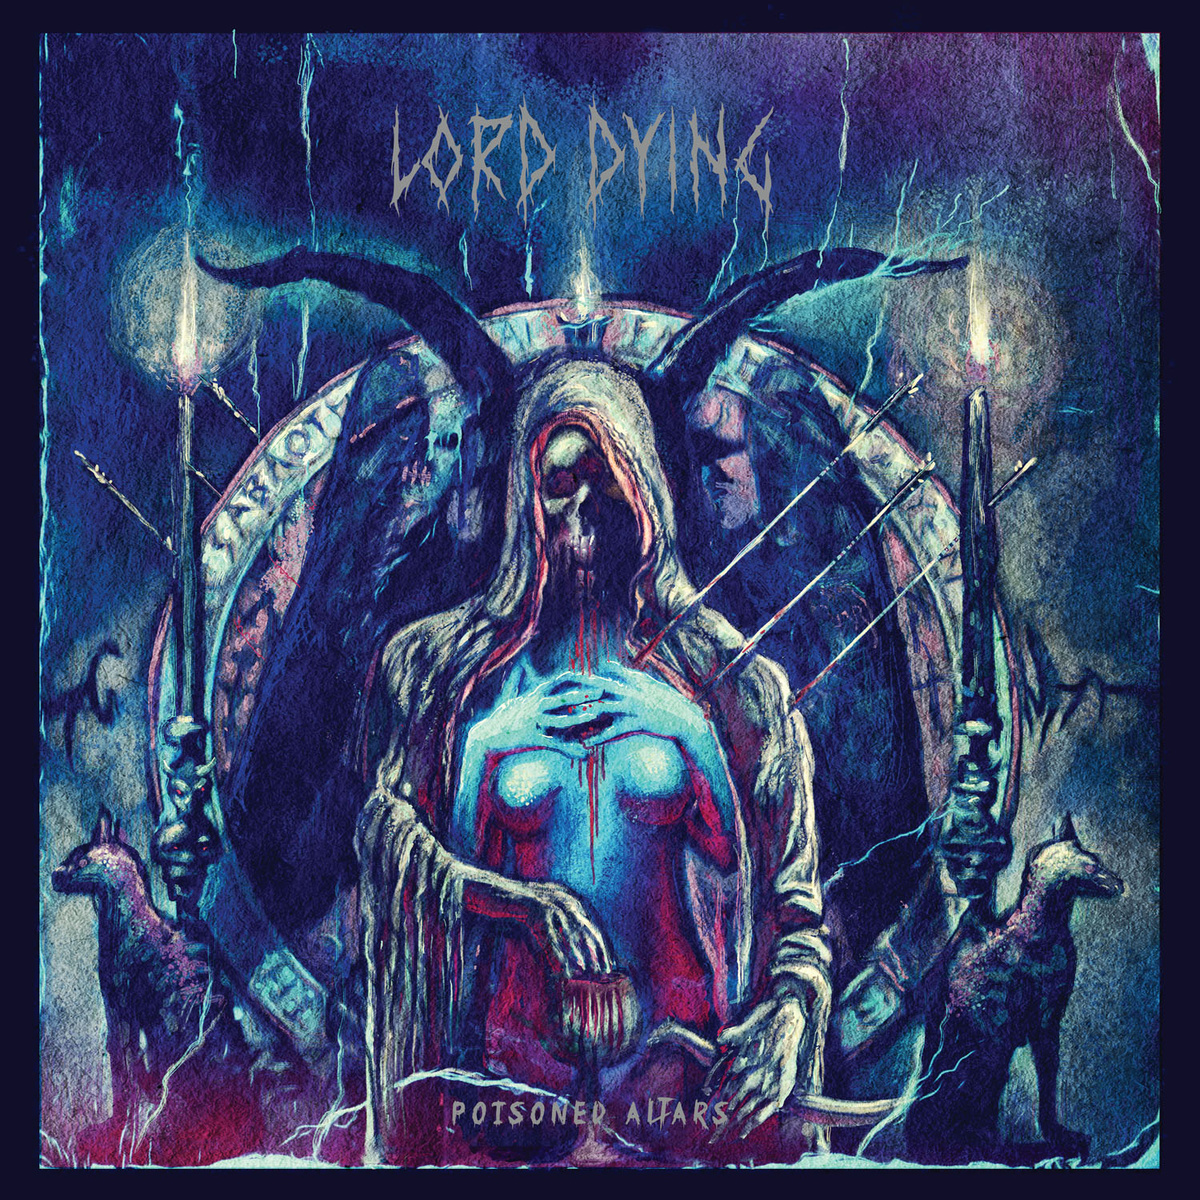 Lord Dying "Poisoned Altars"